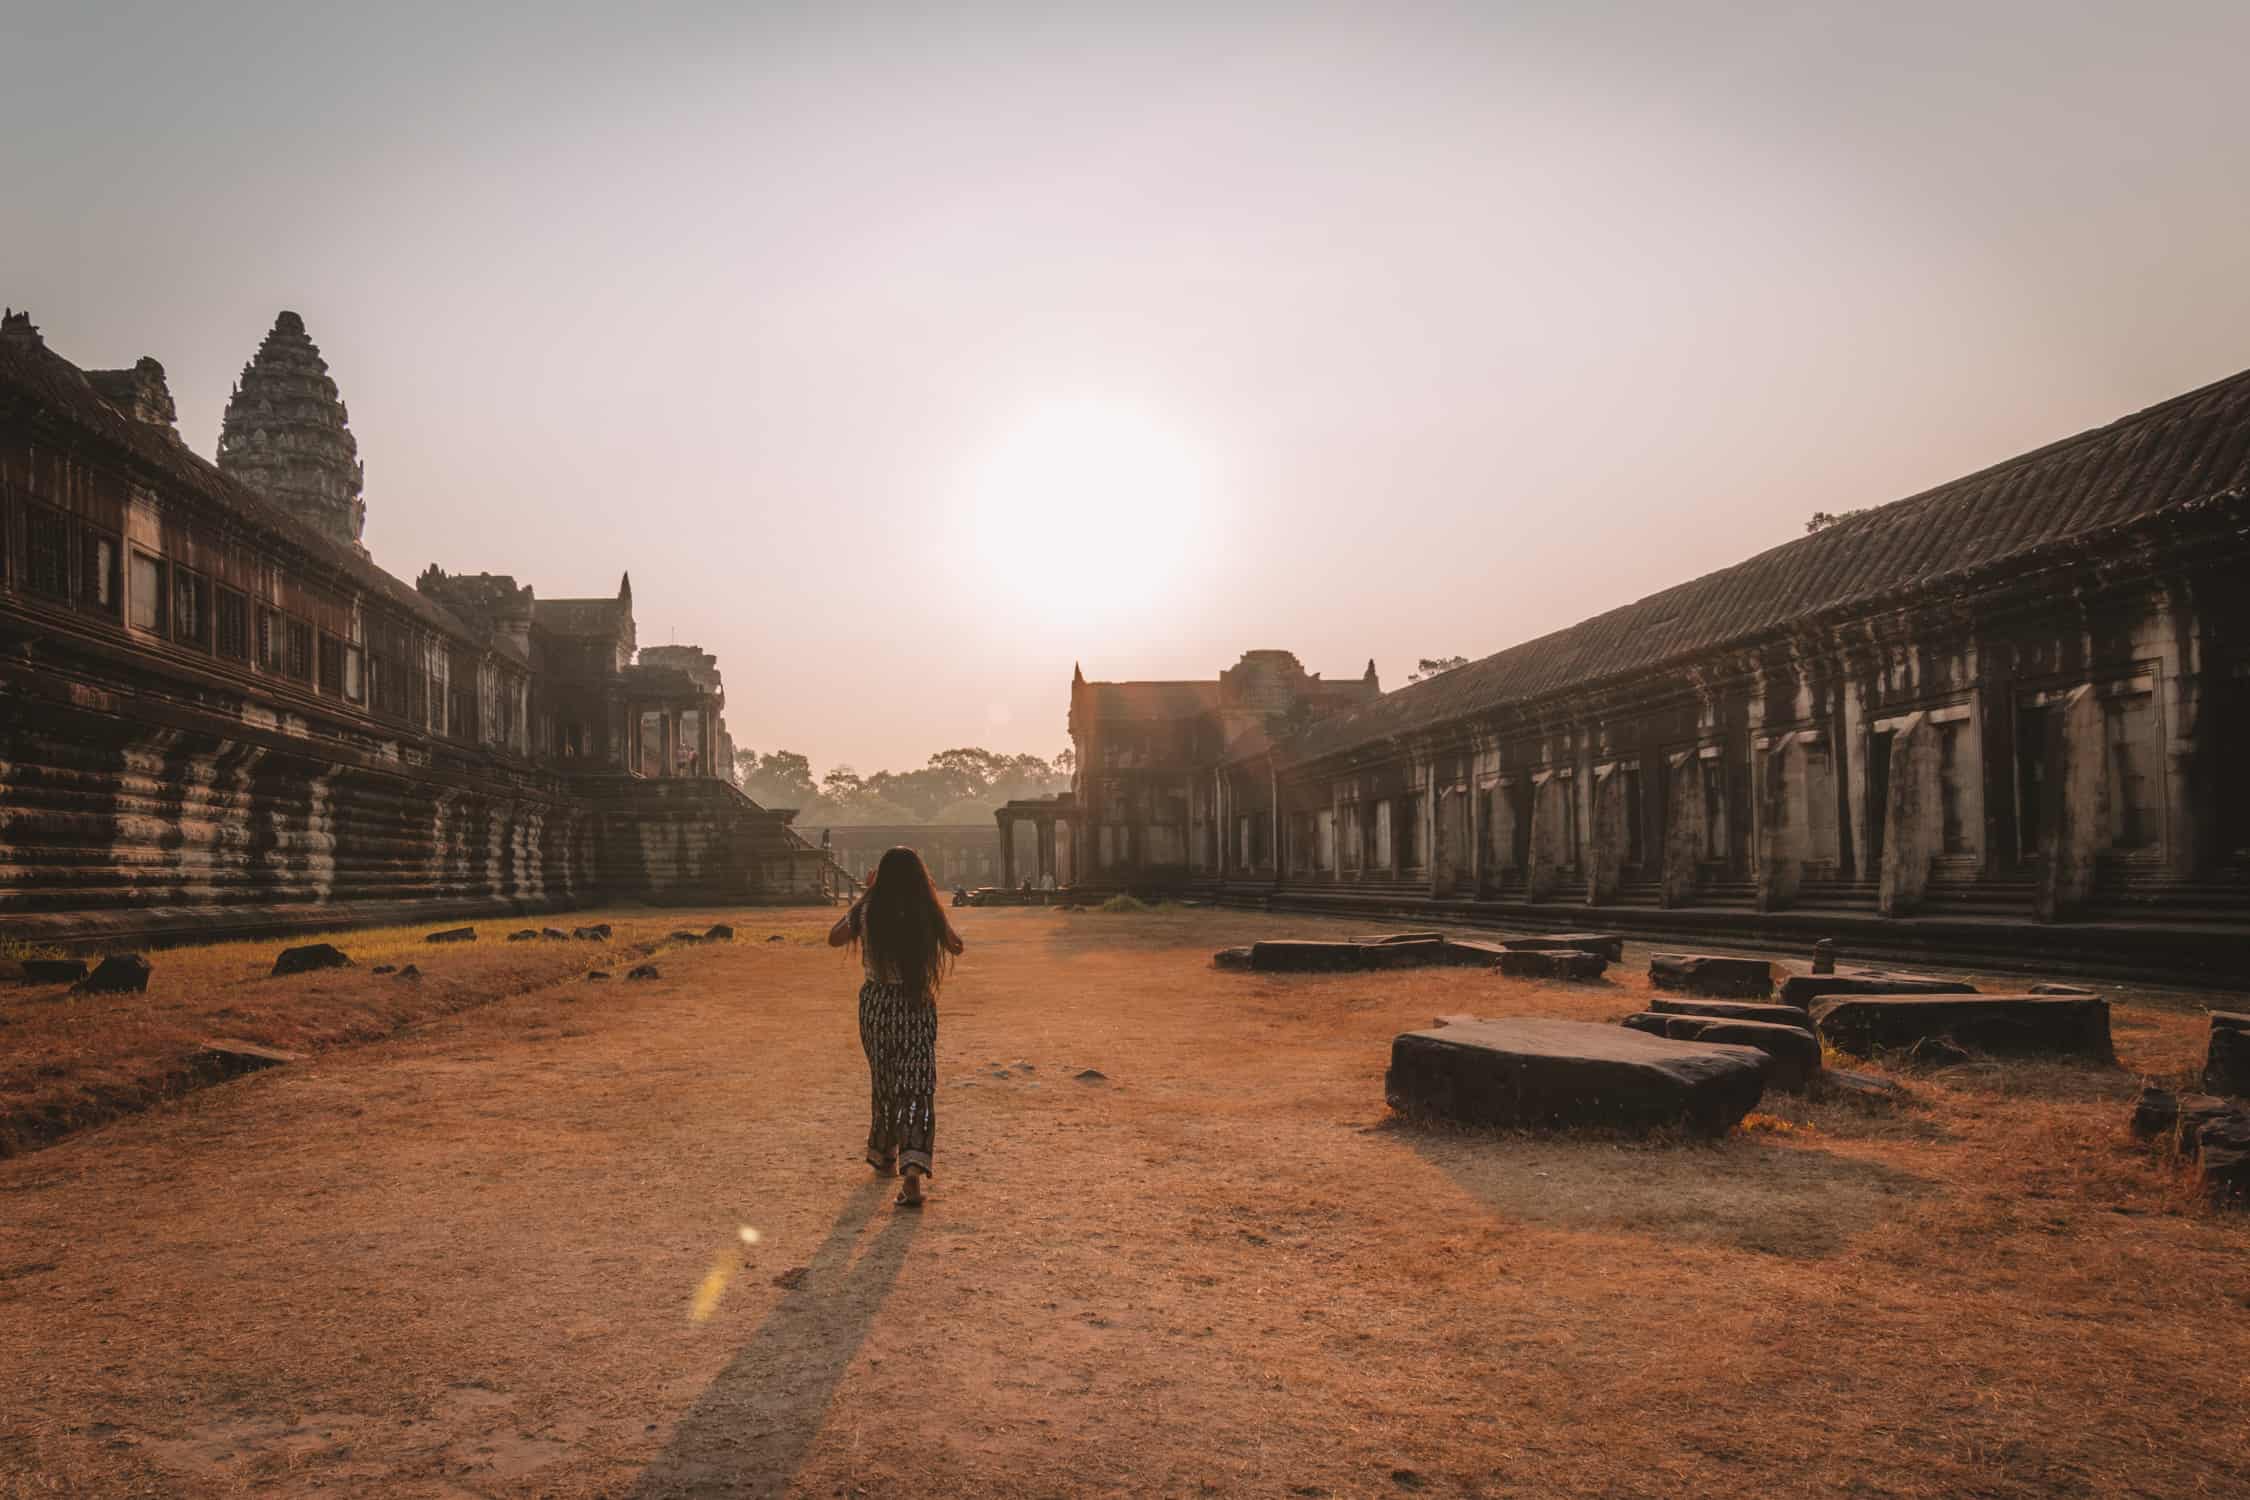 Mad Monkey Hostels How to Spend 48 Hours in Siem Reap, Cambodia